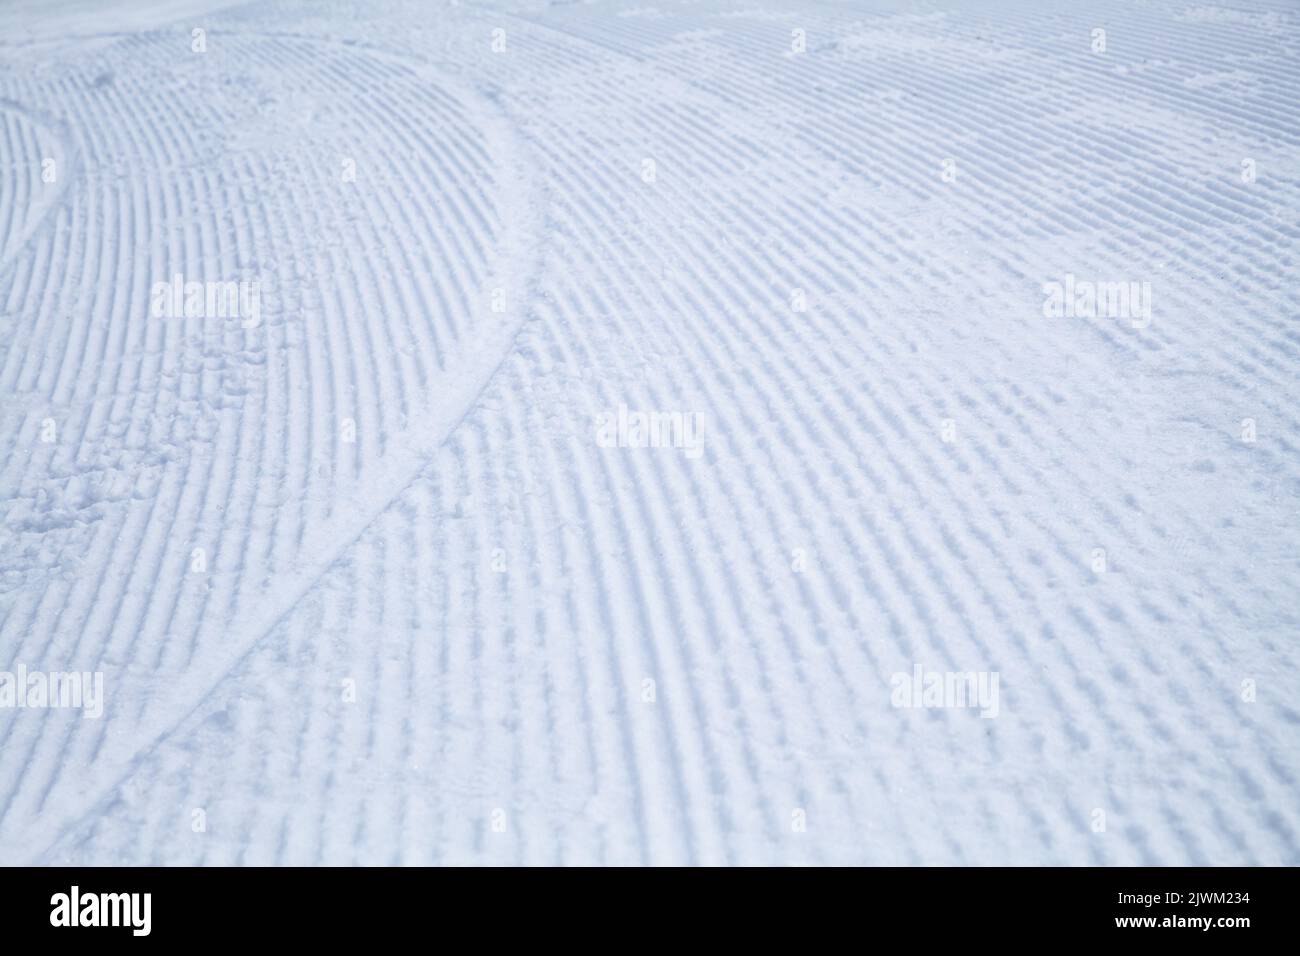 Striped texture of a snowy ski slope, winter sports background photo Stock Photo